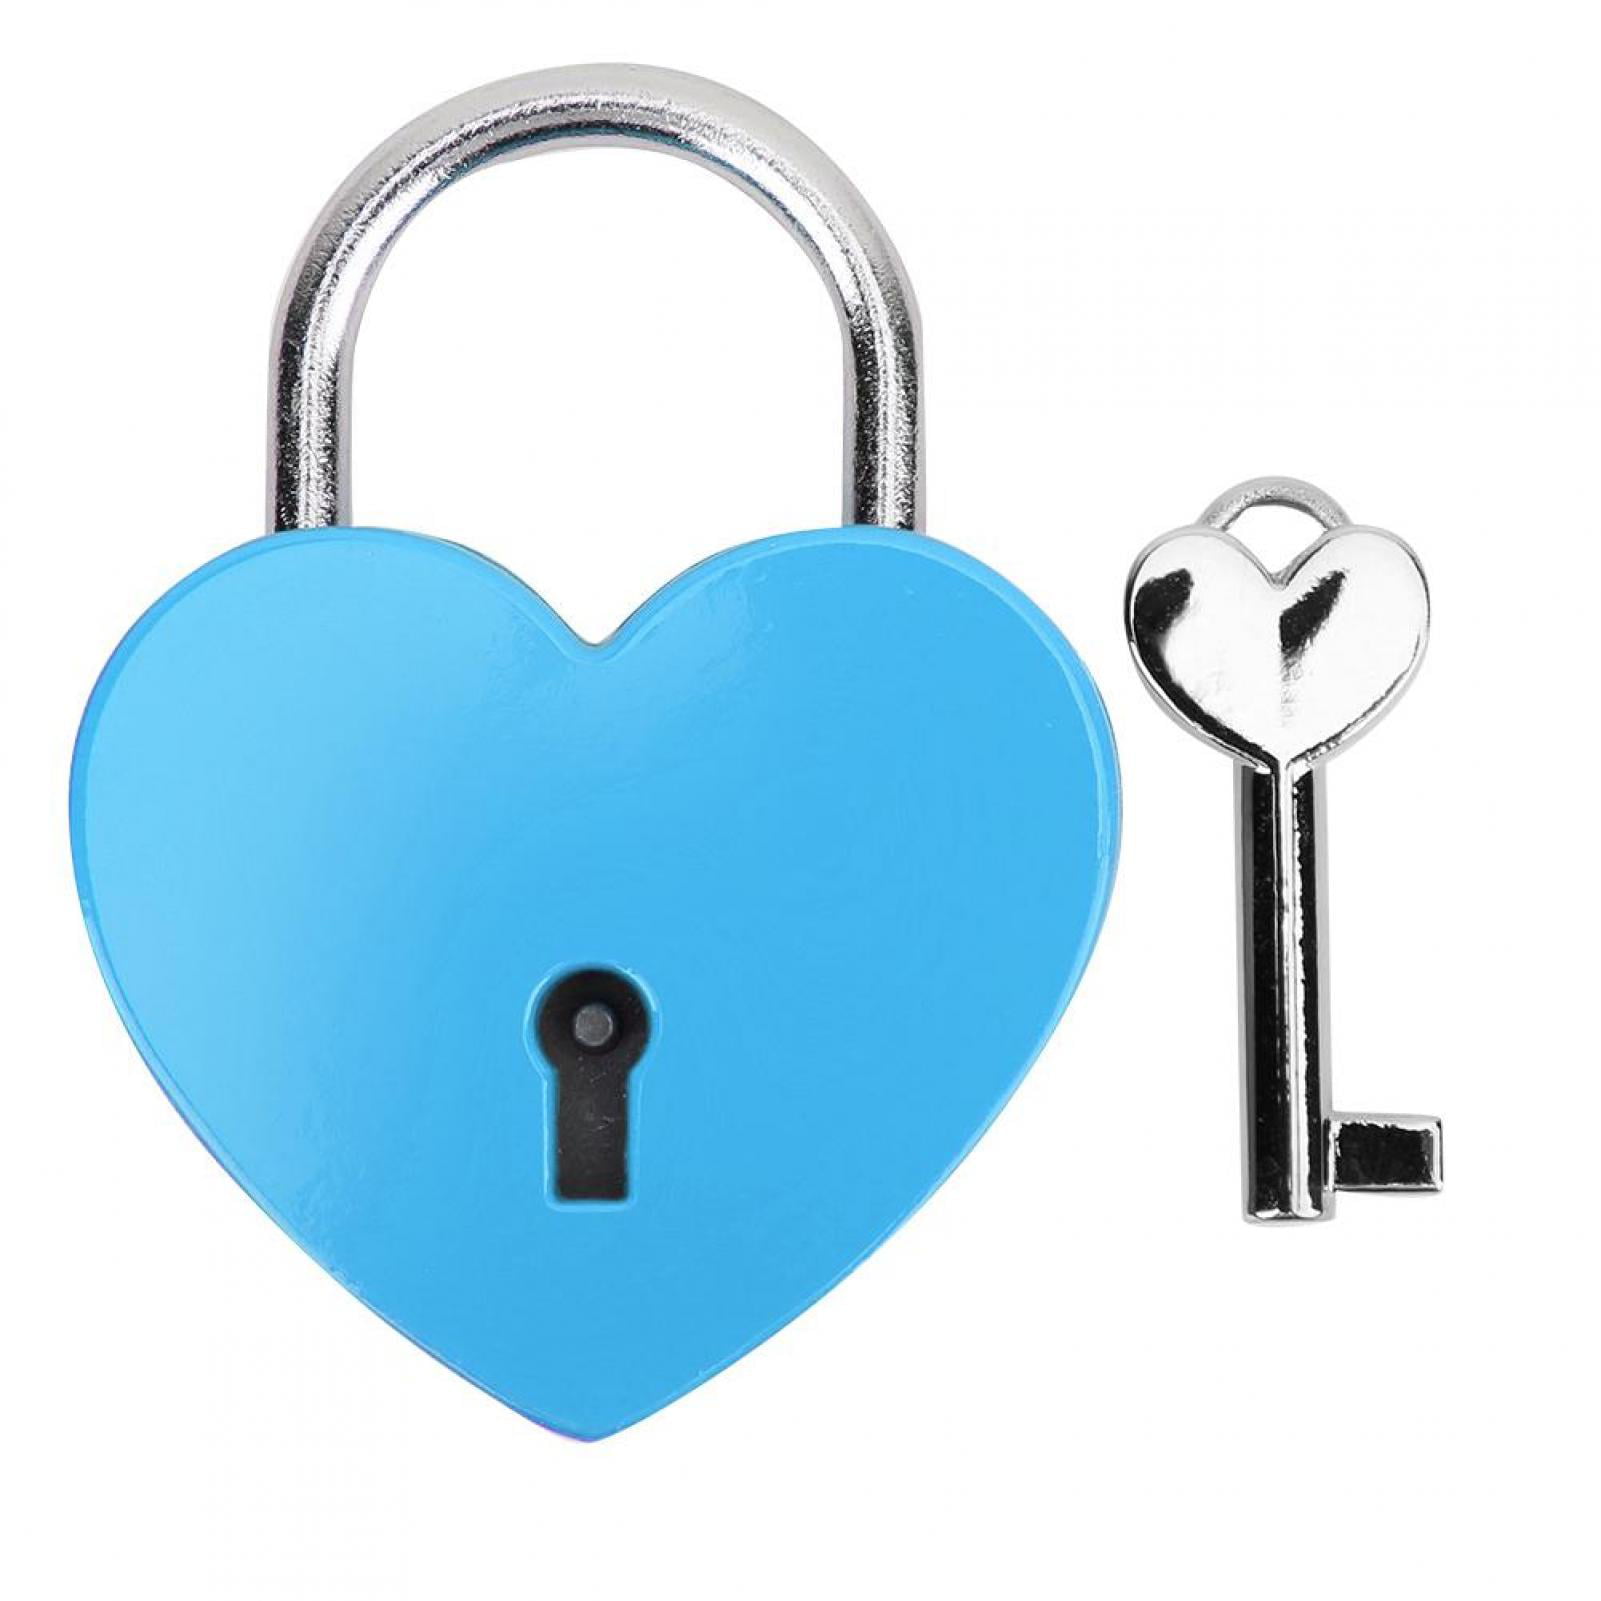 Details about   Durable Metal Colorful Heart Shaped Lock with Keys Professional Home Supplies 